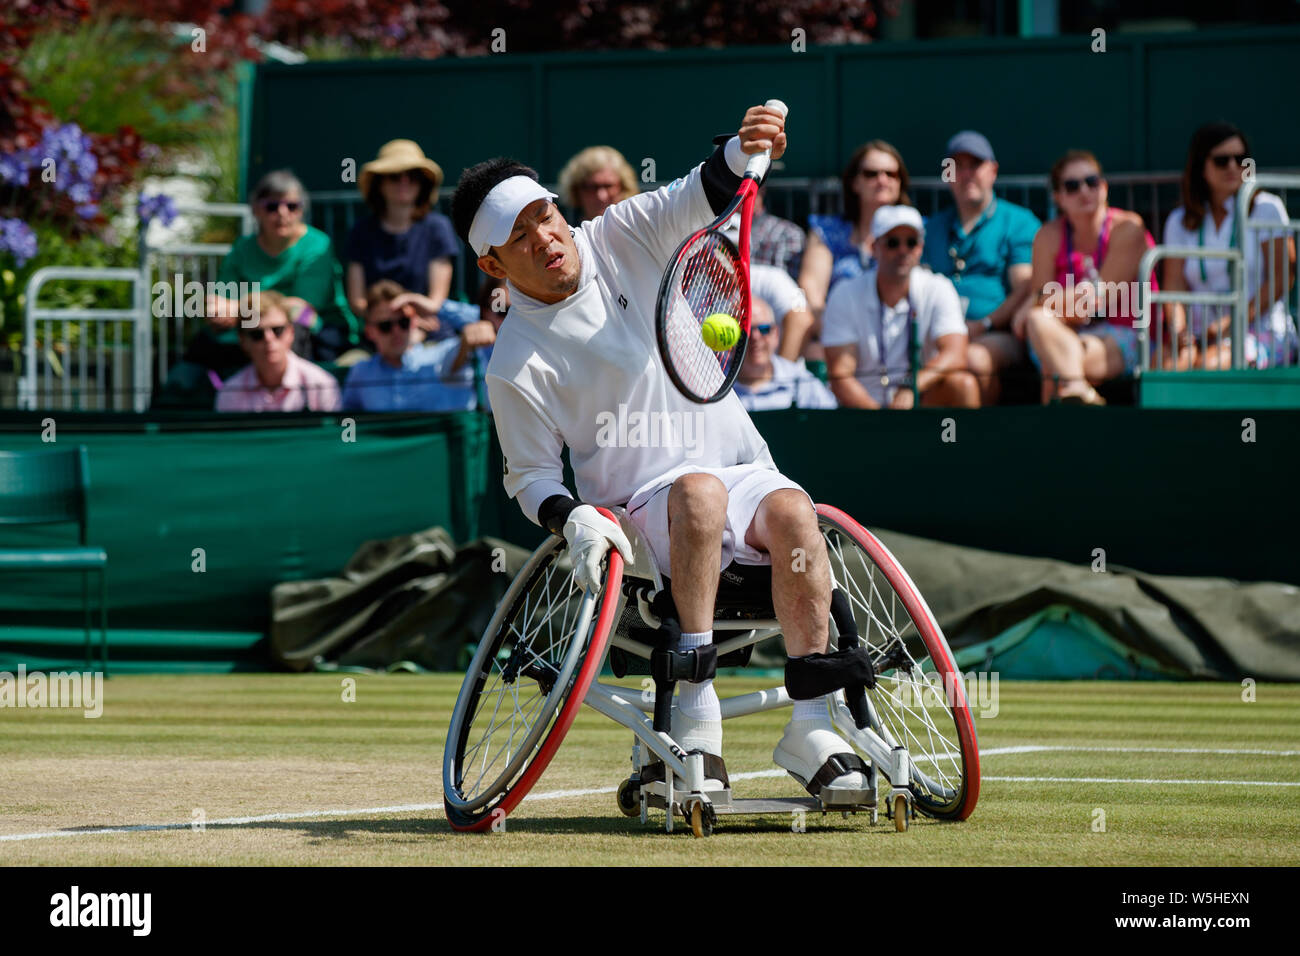 Koji Sugeno of Japan playing Quad Singles at The Championships , Wimbledon 2019 with Number 1 Court behind. Held at The All England Lawn Tennis Club, Stock Photo